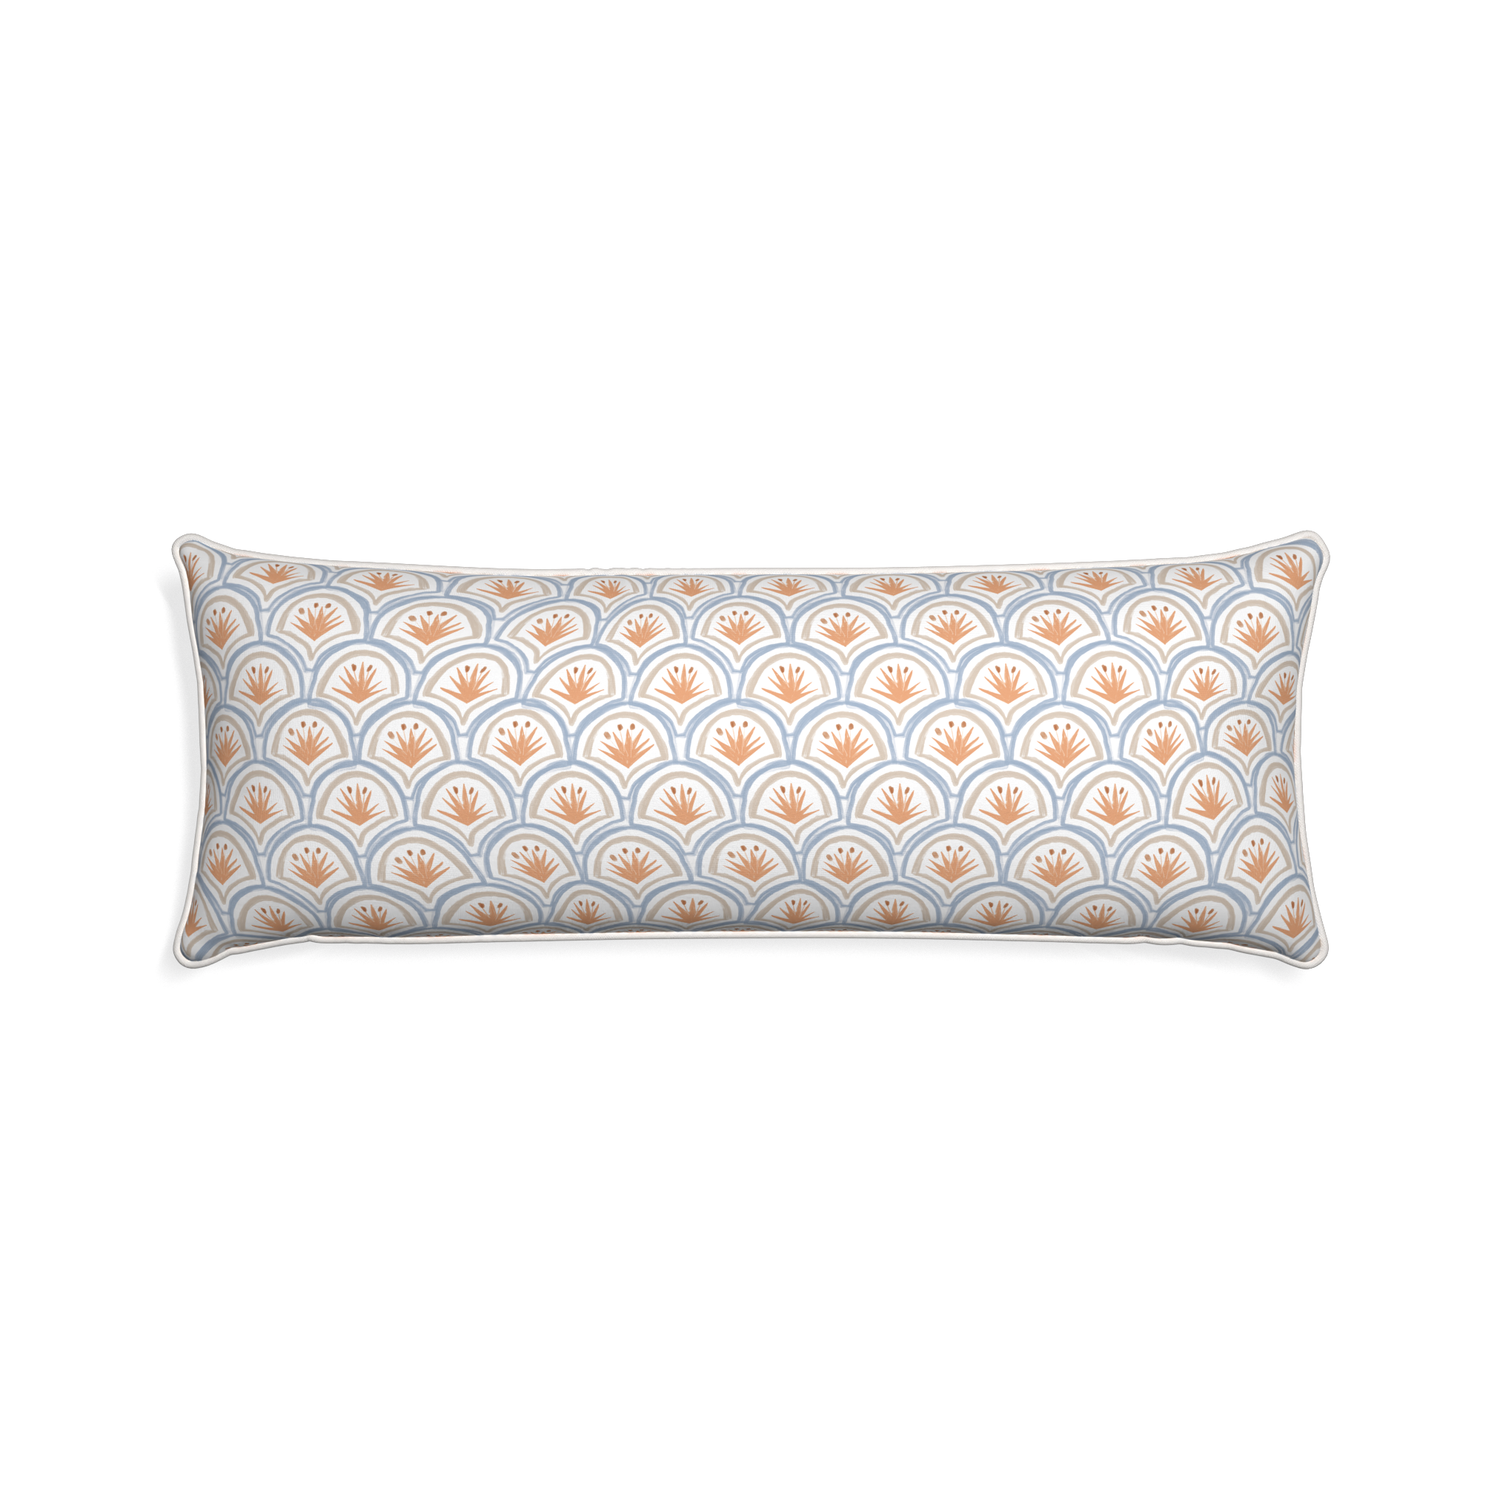 Xl-lumbar thatcher apricot custom pillow with snow piping on white background